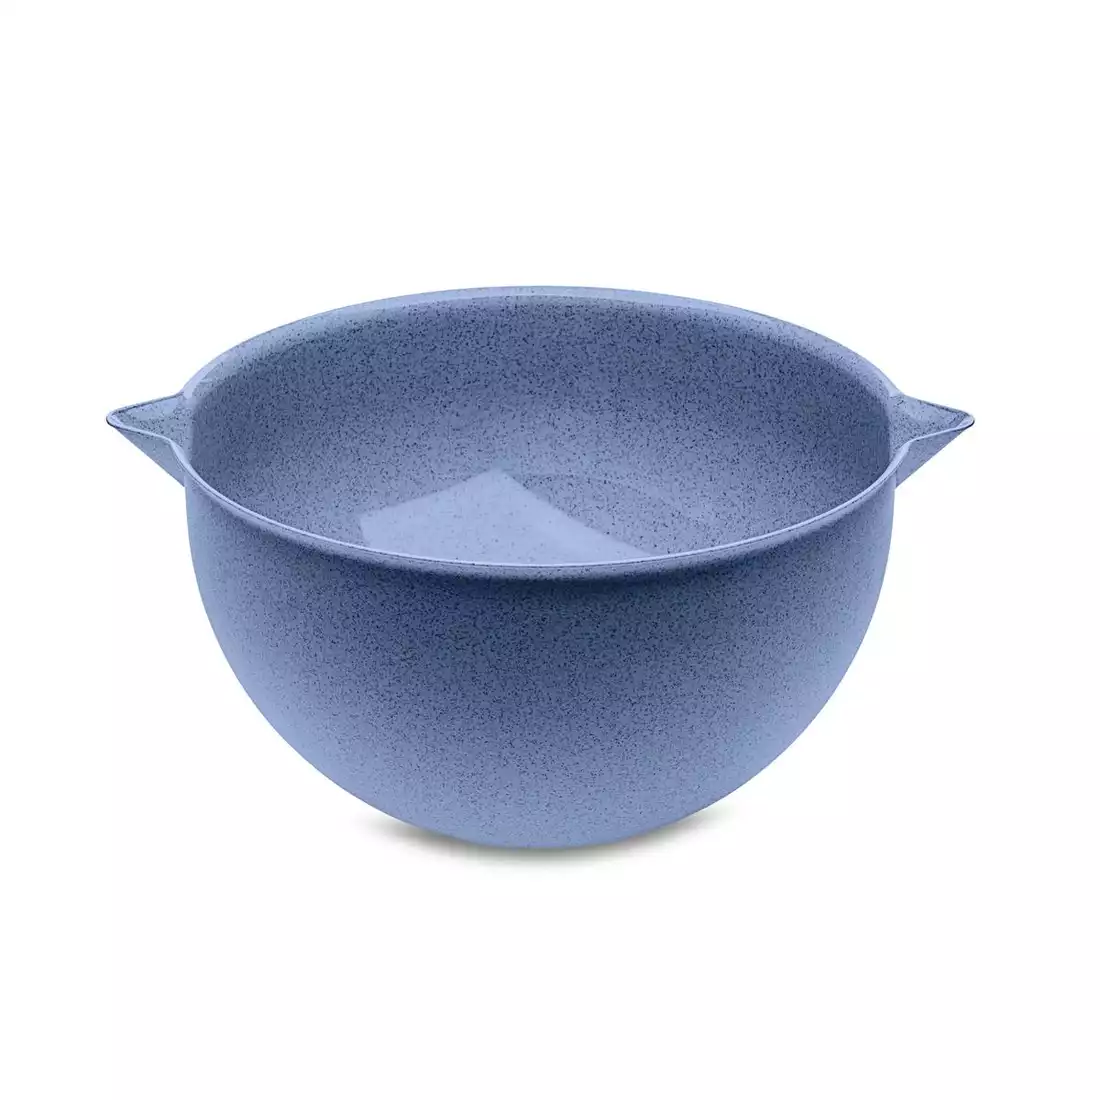 KOZIOL PALSBY round bowl with a spout 5L, organic blue